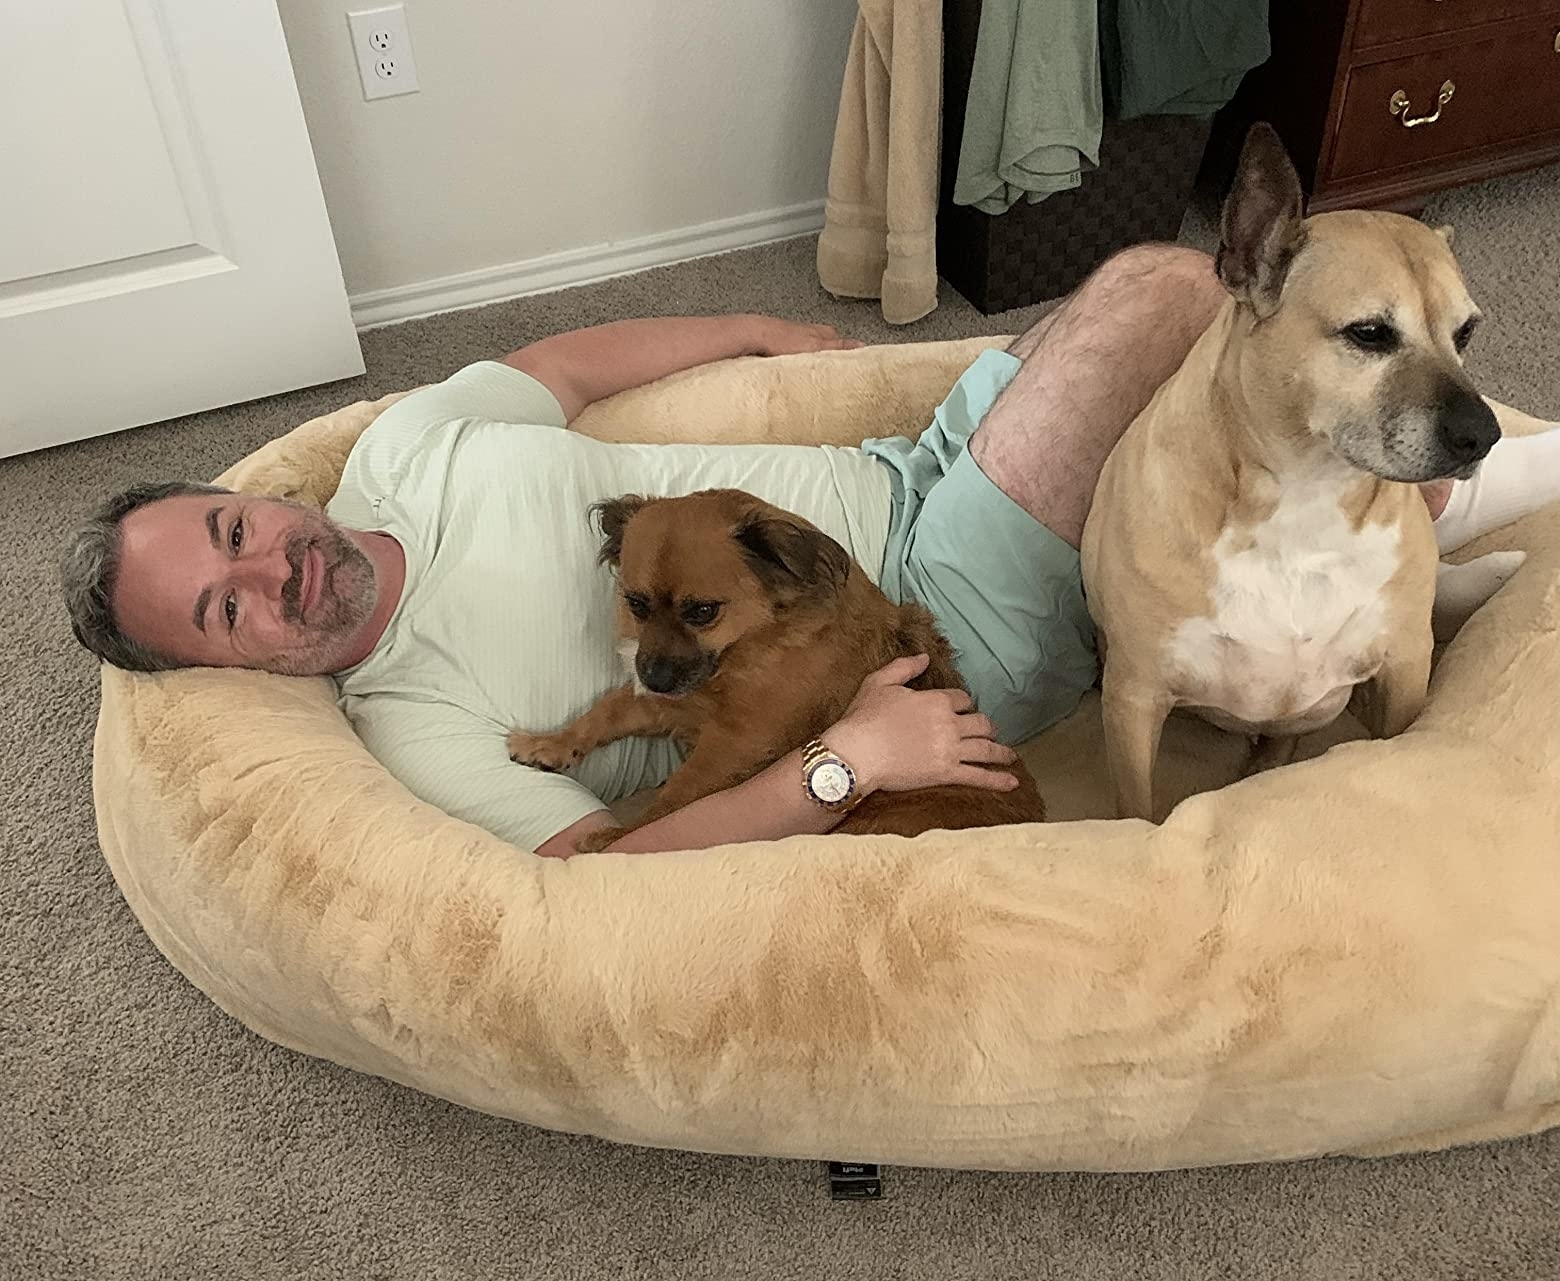 person lying in a large pet bed with two dogs, looking happy and relaxed